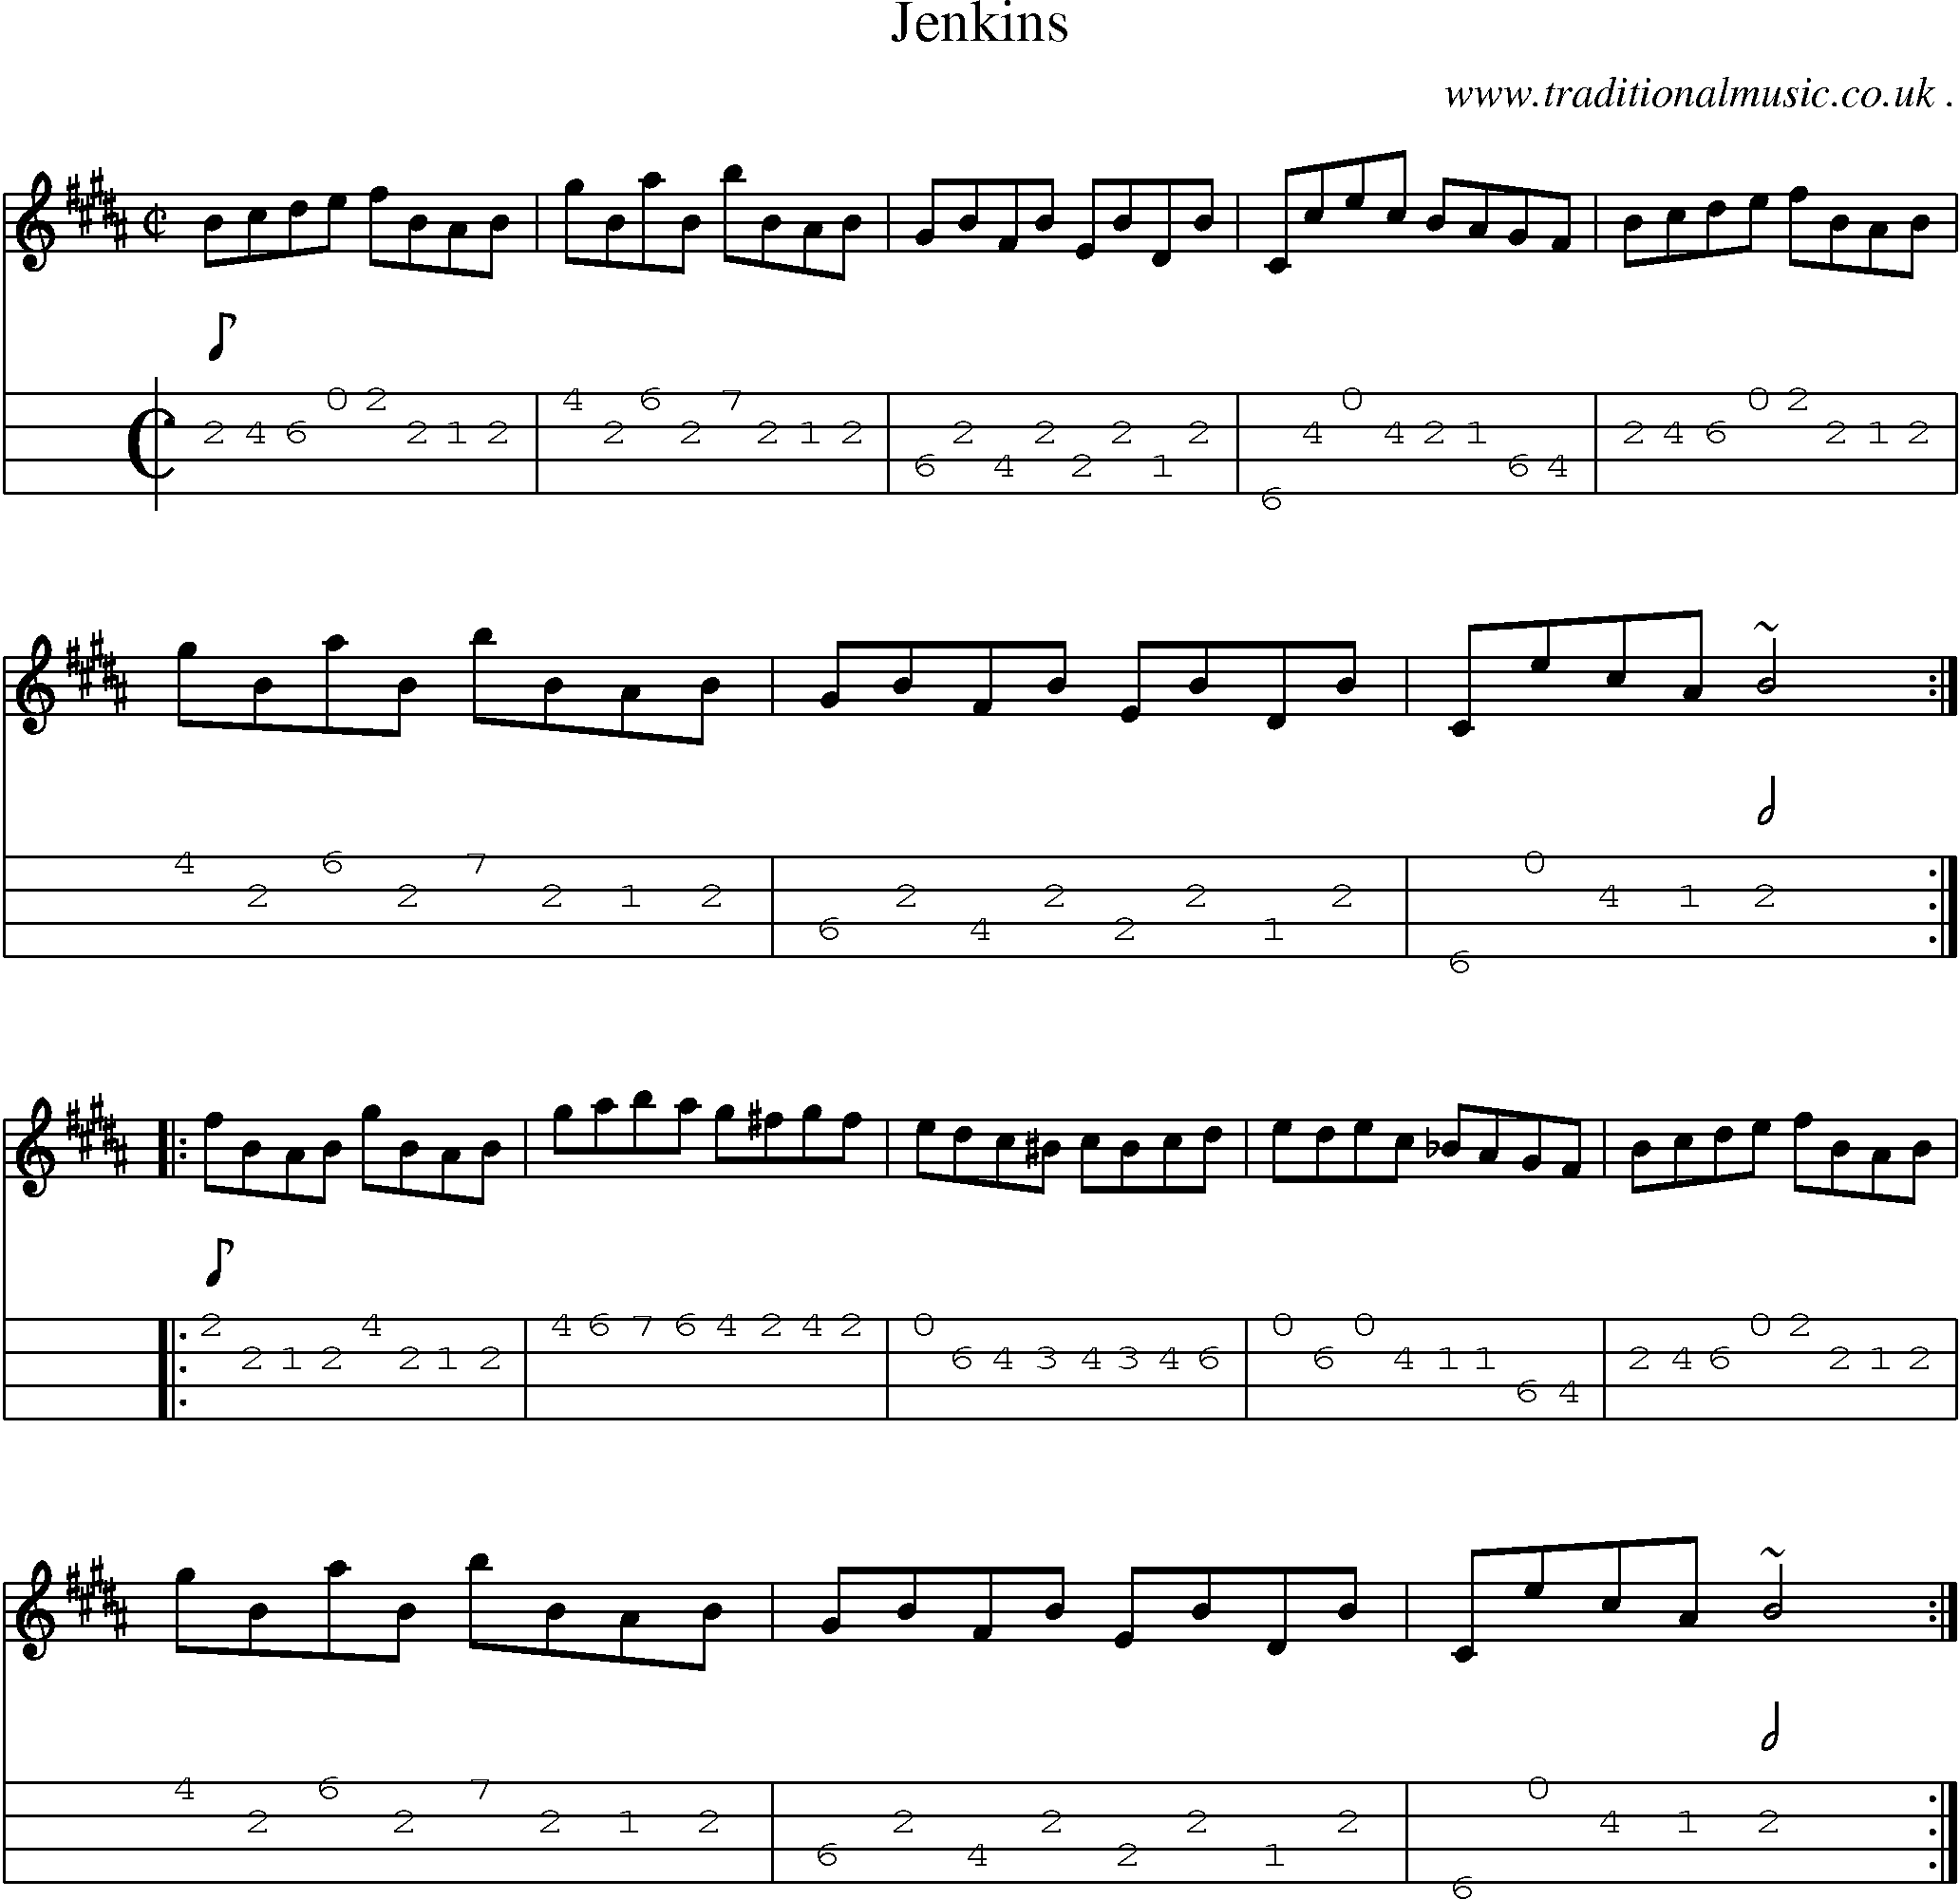 Sheet-music  score, Chords and Mandolin Tabs for Jenkins